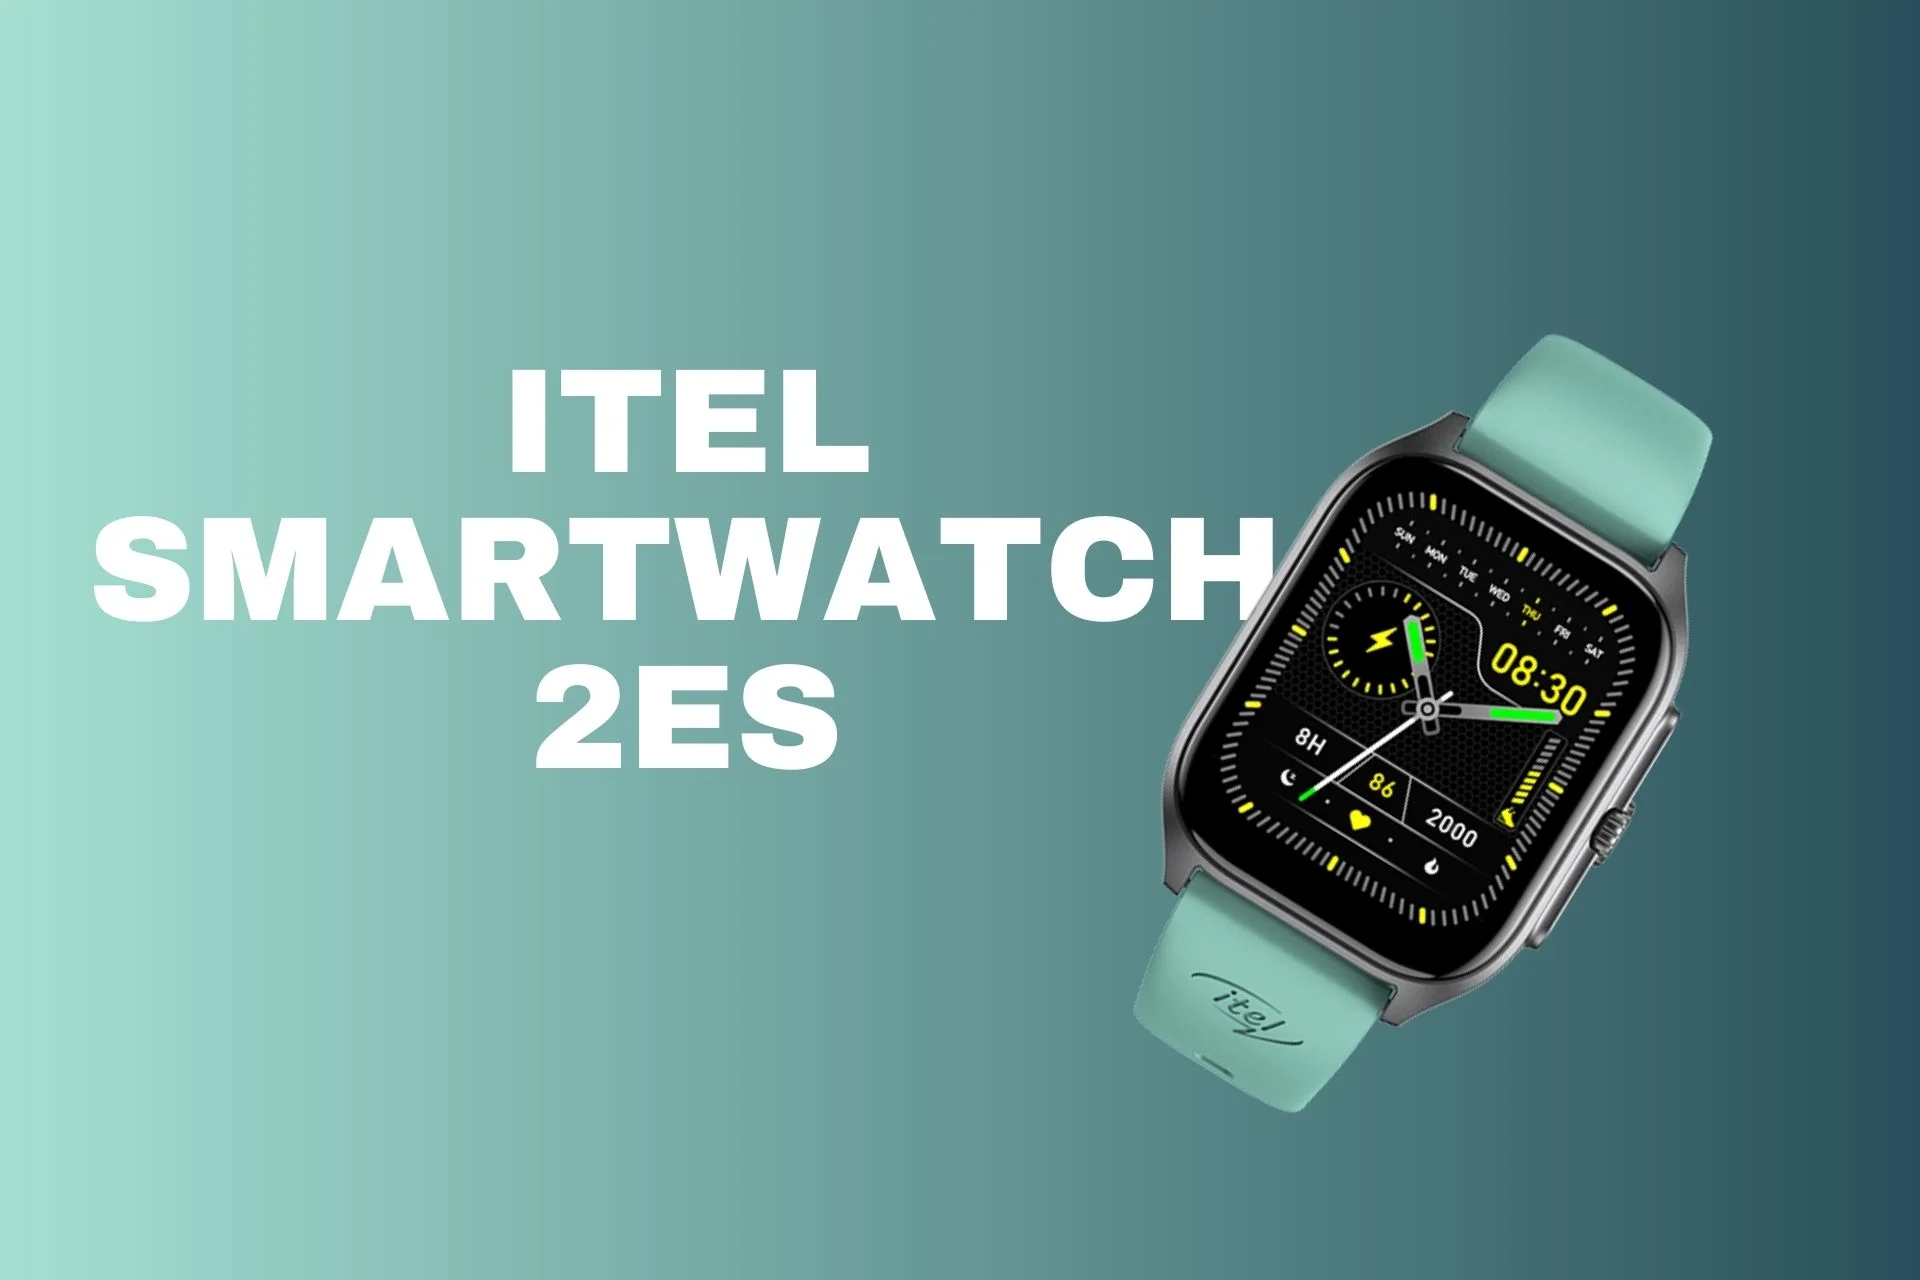 You are currently viewing Itel Smartwatch 2ES with 1.8″ Display, Bluetooth Calling, Spo2, Launched in India For Rs ₹1,699